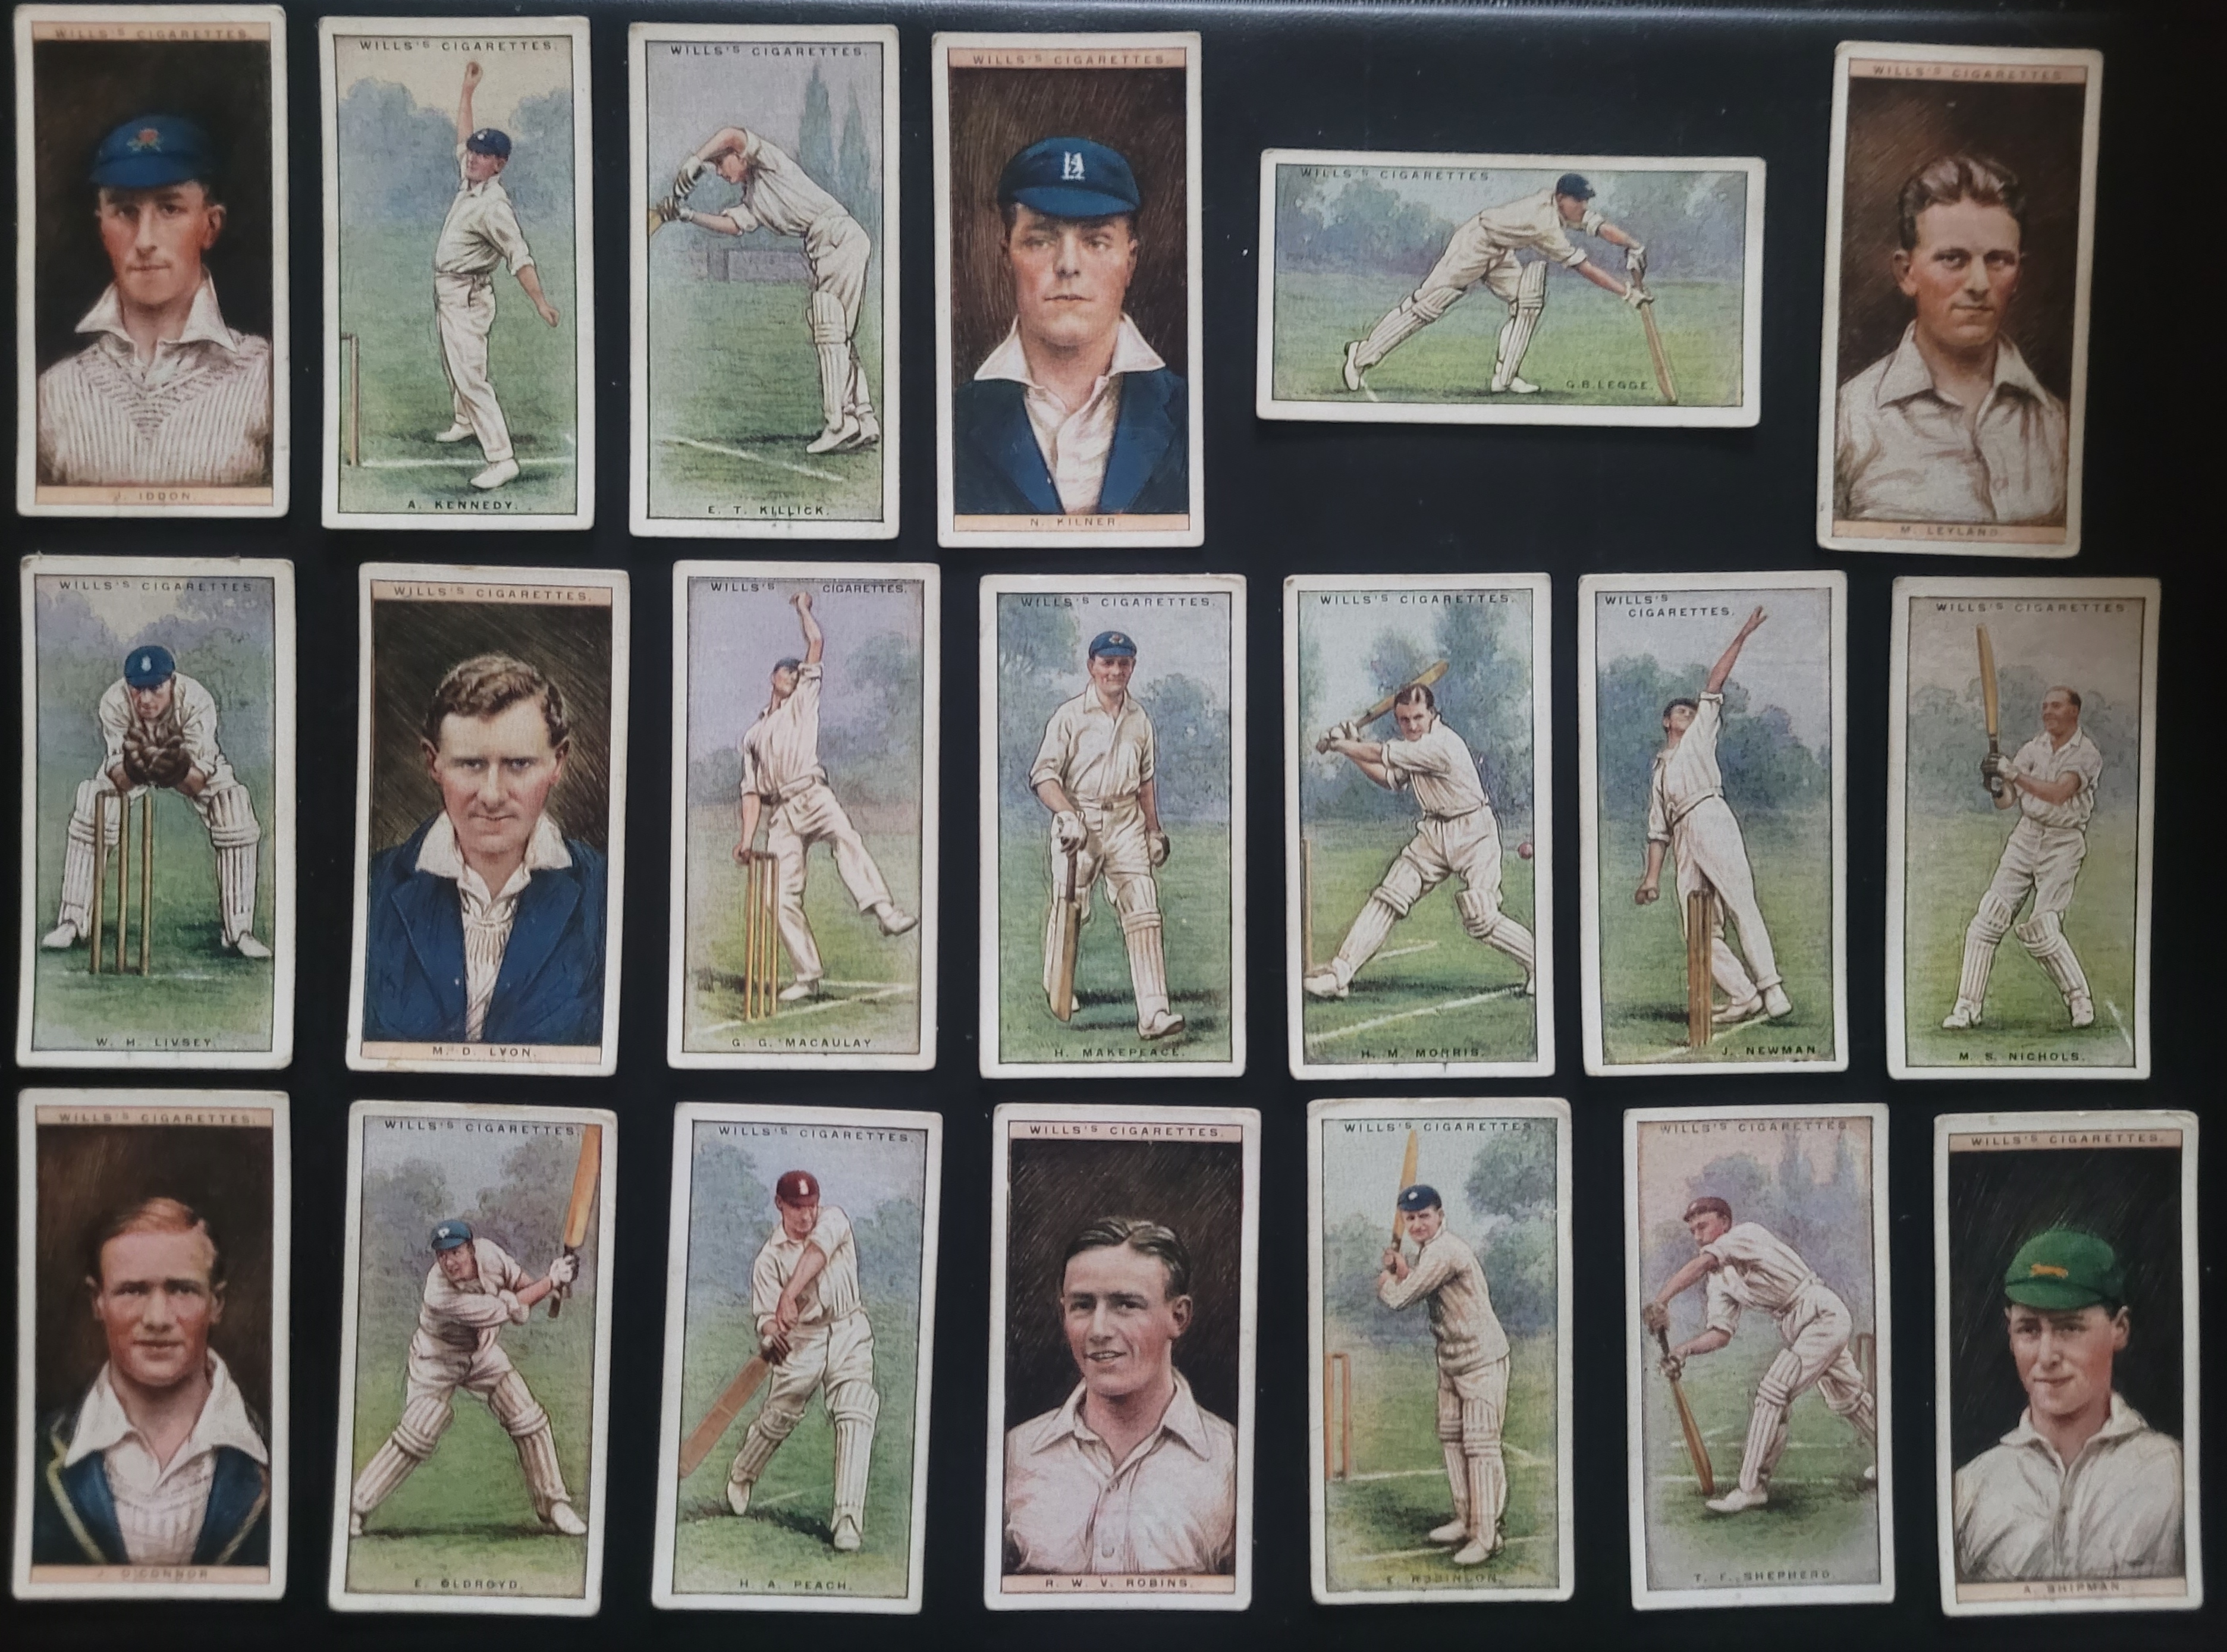 WD & HO WILLS CRICKET CIGARETTE CARDS 49 FROM SET OF 50 ( MISSING NUMBER 39 ) - Image 2 of 4